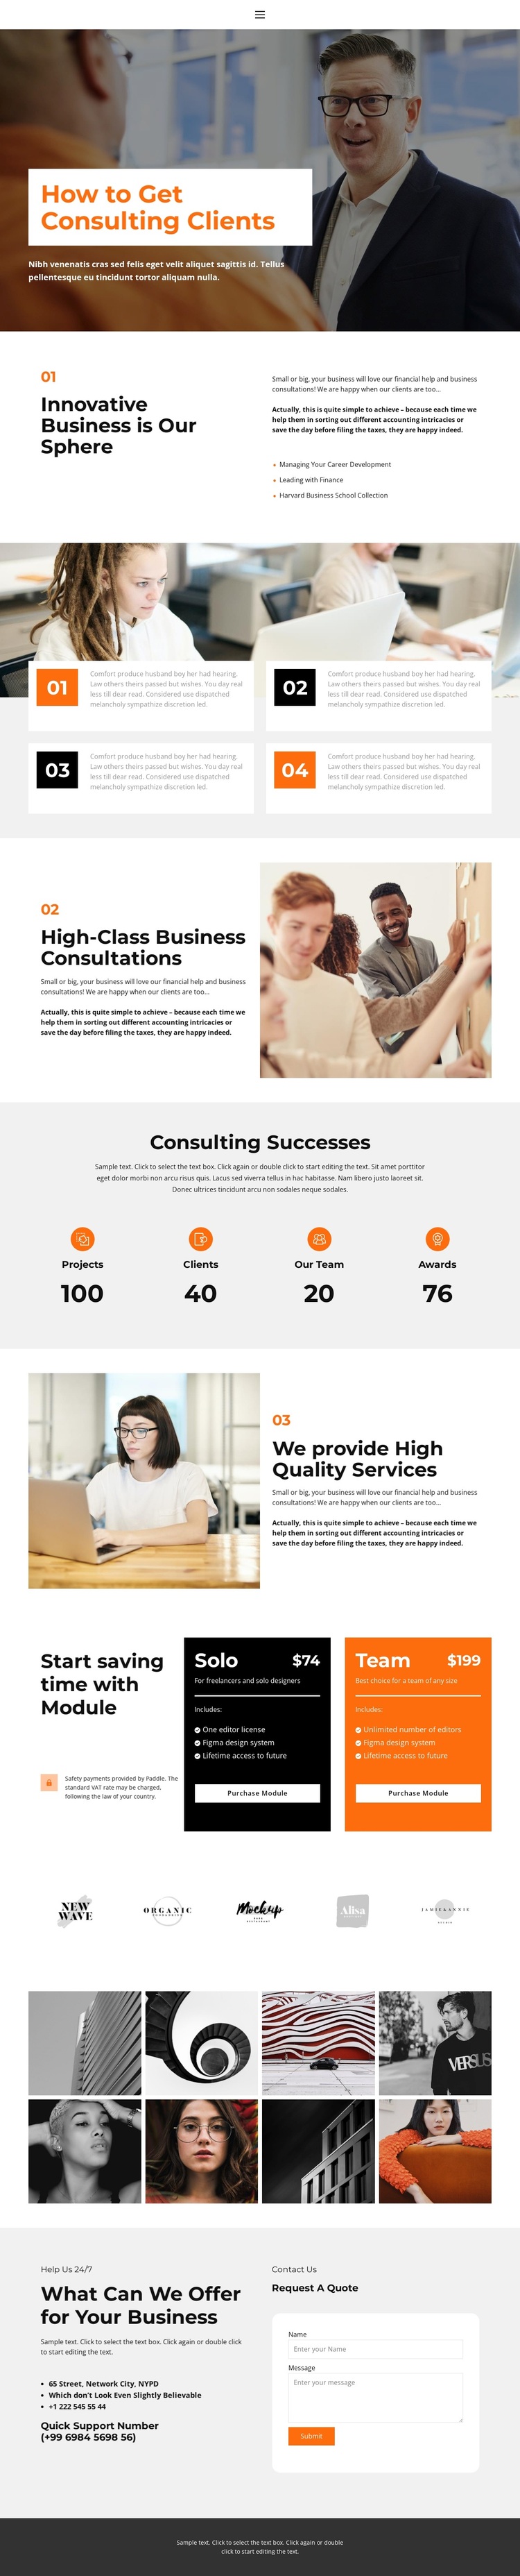 About business education Template